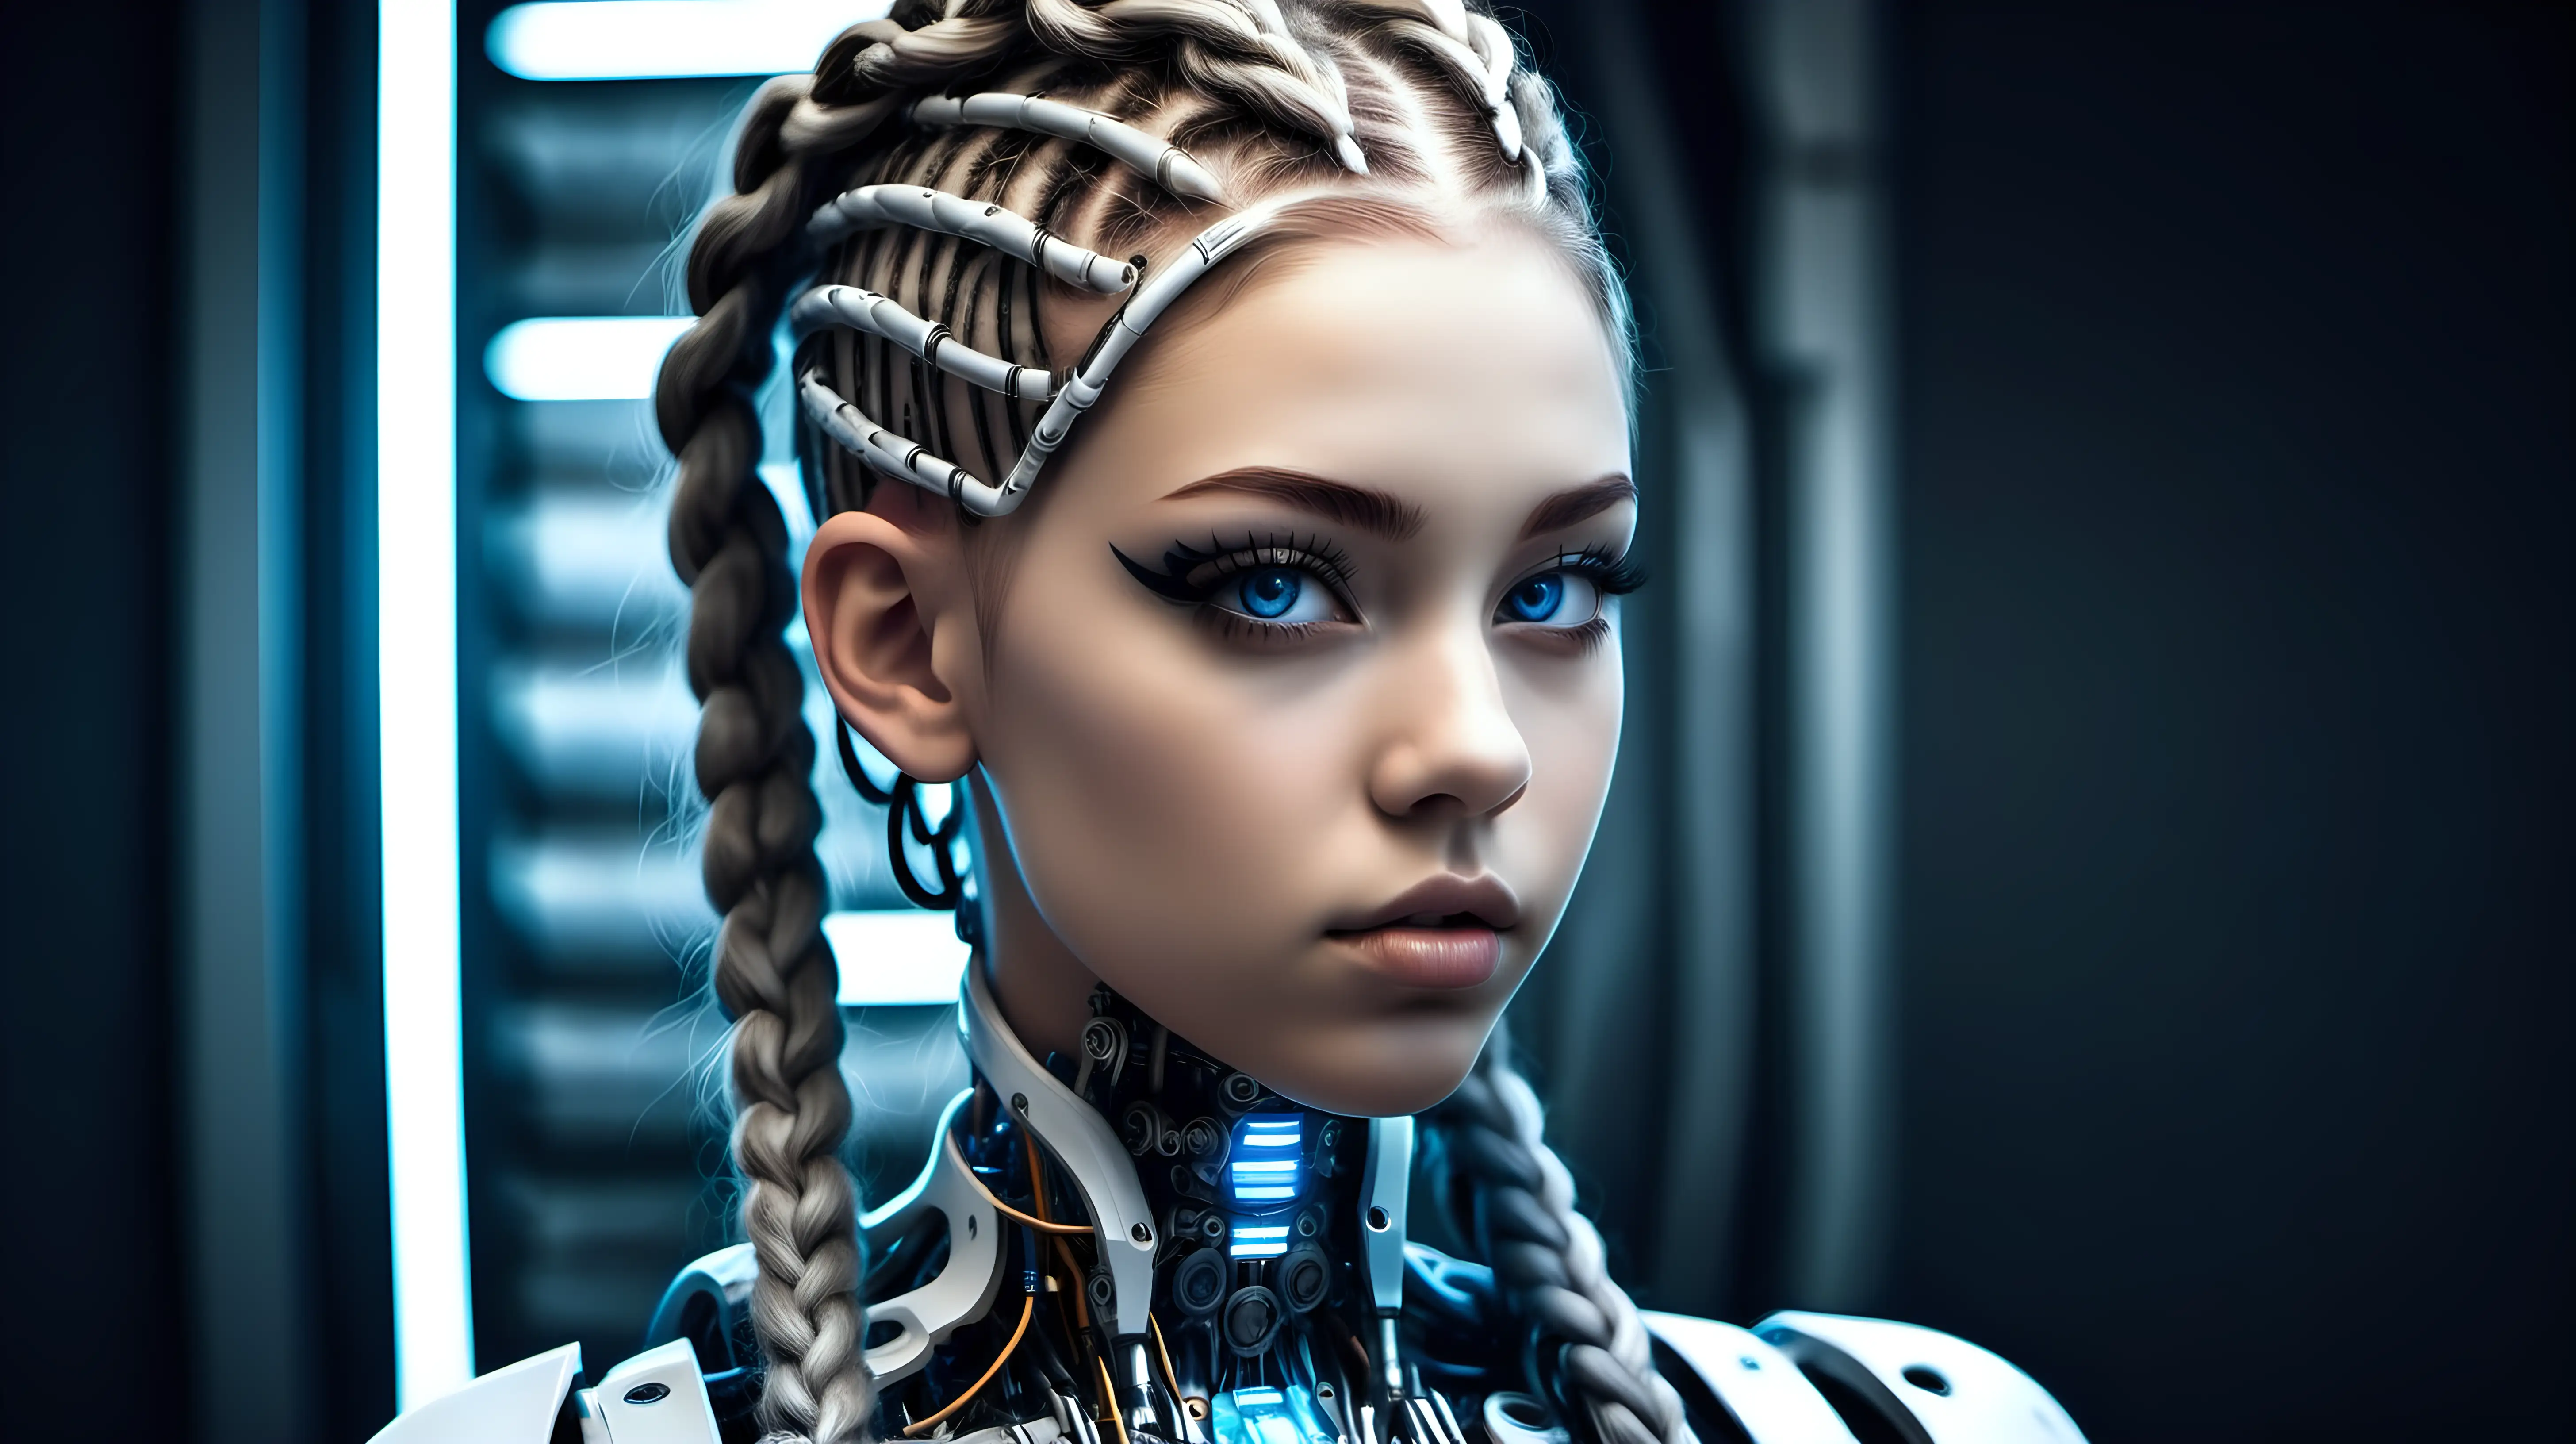 Gorgeous cyborg woman, 18 years old. She has a cyborg face, but she is extremely beautiful. Futuristic braids. She is european, she is of white race/